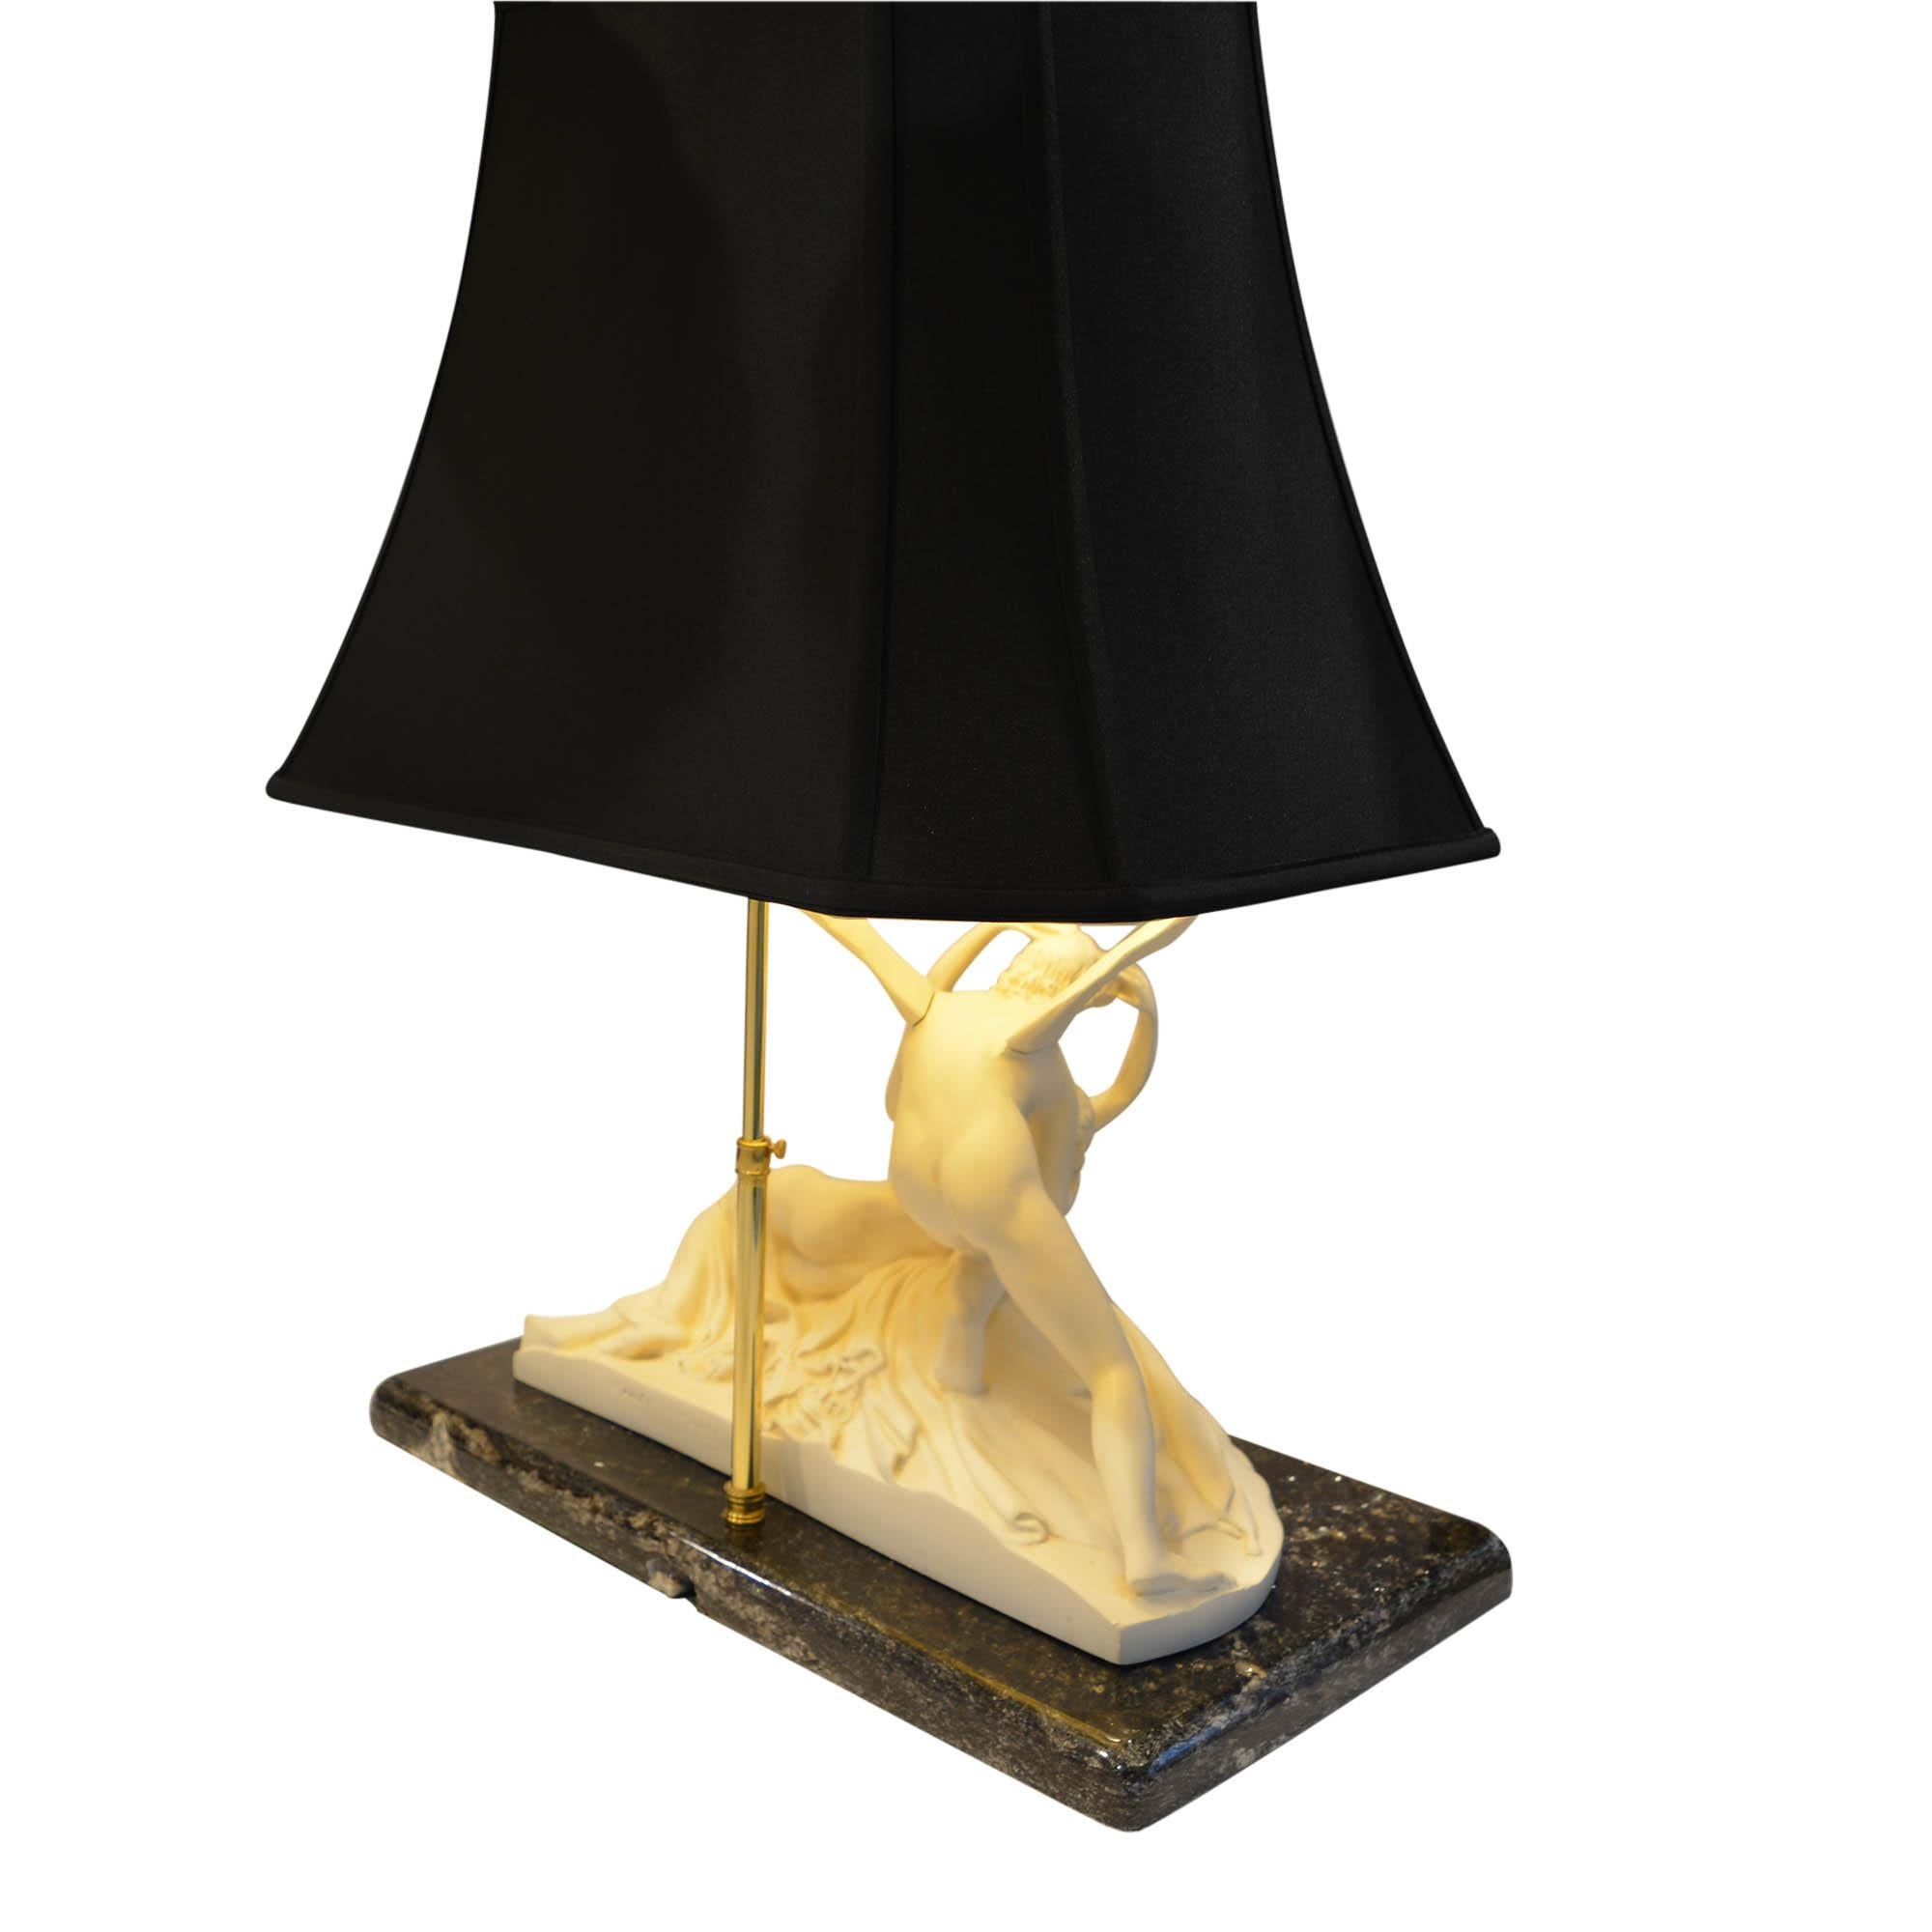 Classical Greek Psyche Revived by Cupid's Kiss Lamp on Marble Base Black Shade Gold Lining